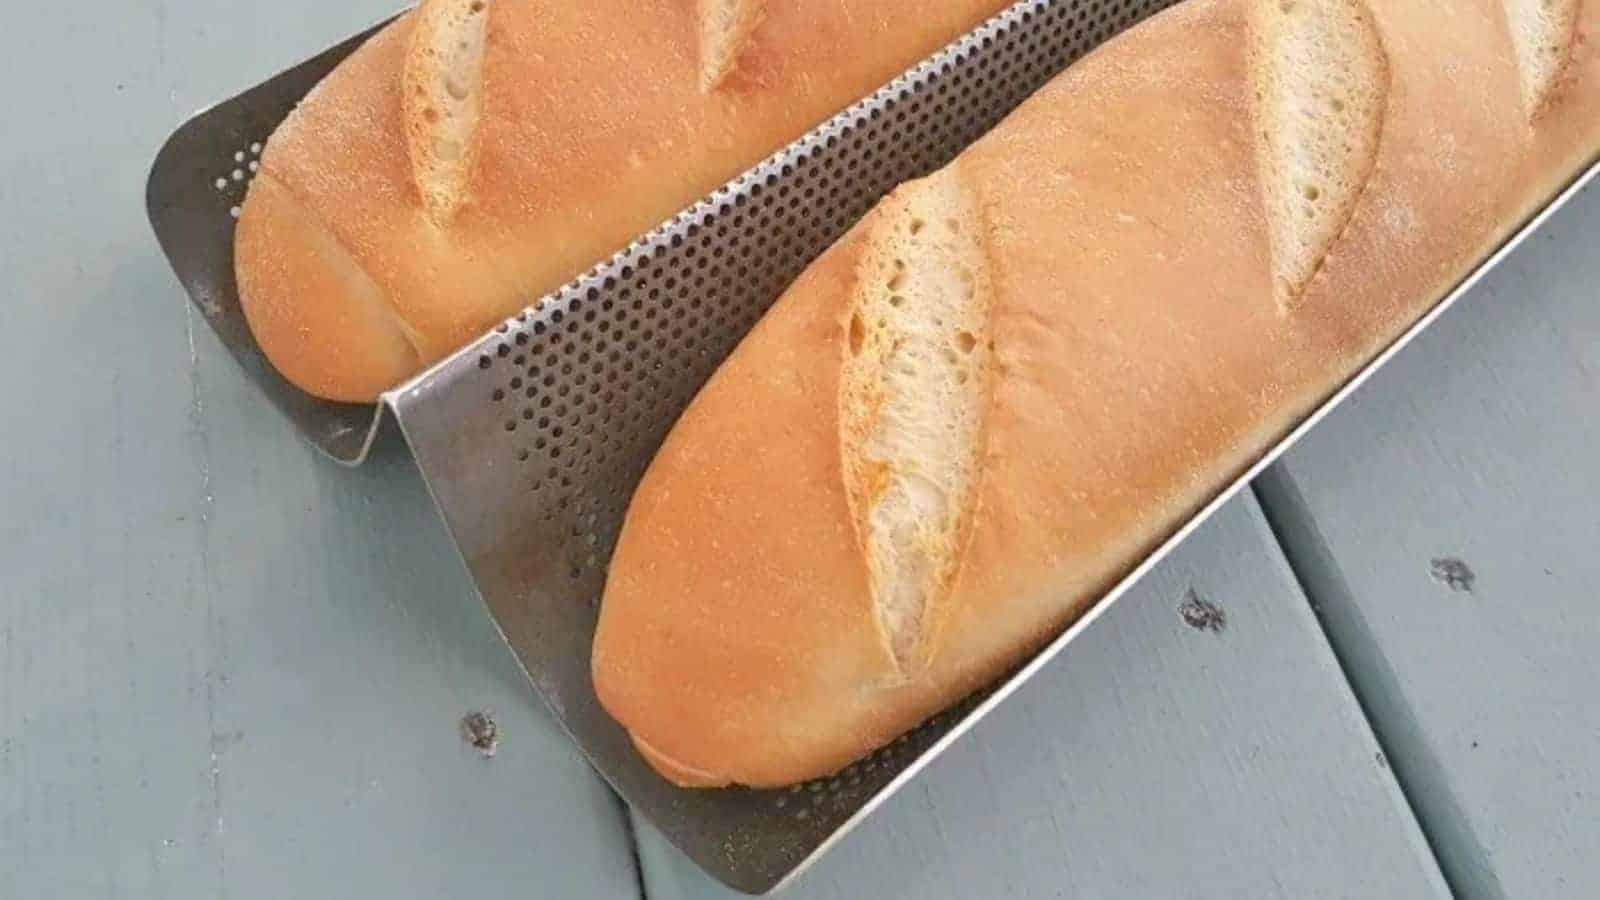 Image shows a closeup of two Baguettes in their pan from an overhead view.